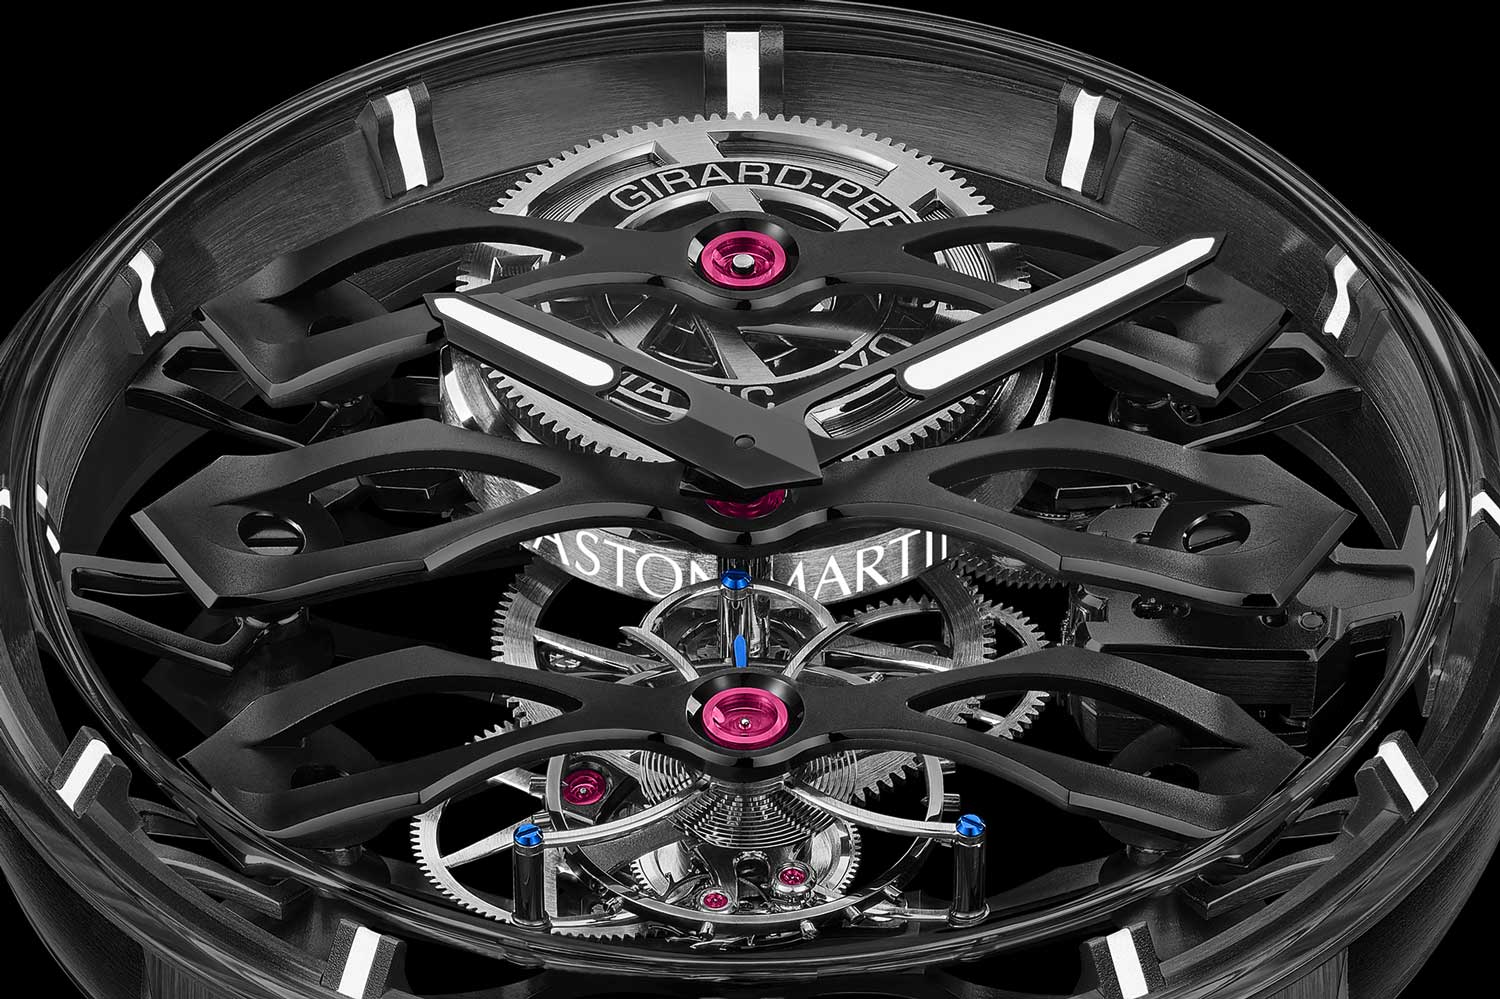 Mounted with the barrel of the barrel on the Girard-Perregaux Tourbillon with Three Flying Bridges – Aston Martin Edition is the solid gold mirco-rotor with the name Aston Martin engraved on the flank of the rotor and filled with white lume that glows blue in the dark